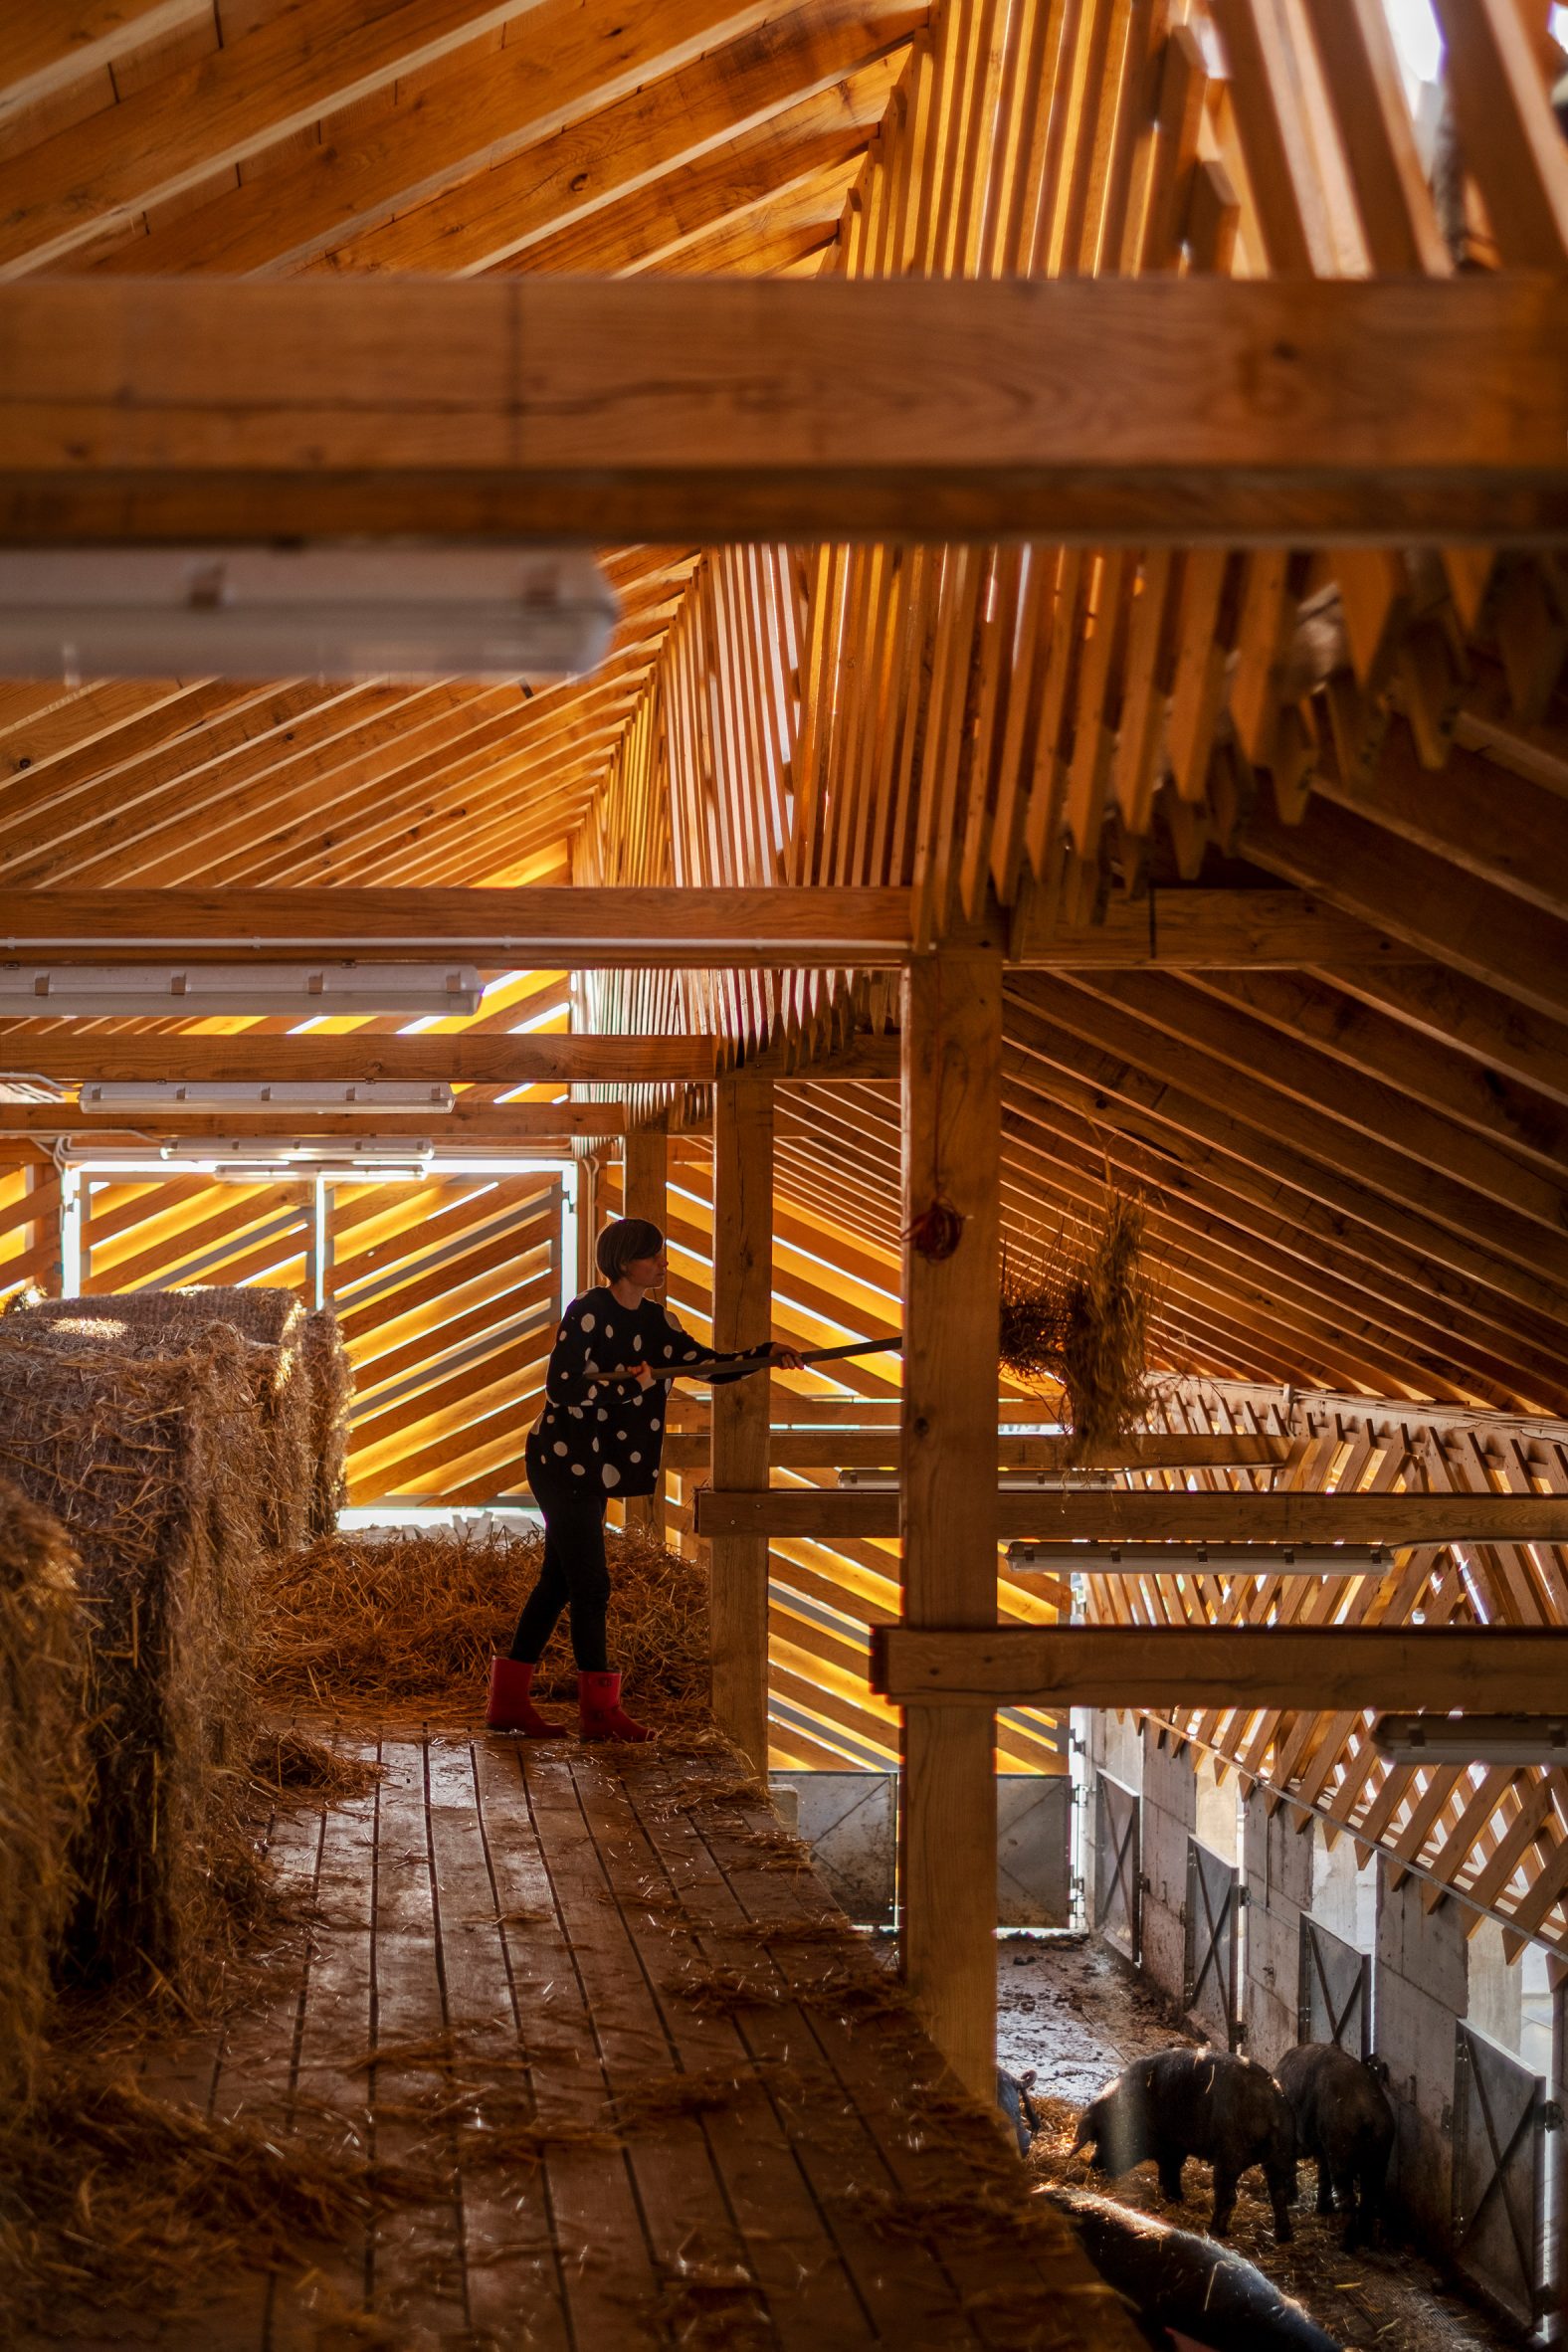 Worker adds bedding to pig pens from an elevated central gallery within the Slavonian Eco Pig Farm